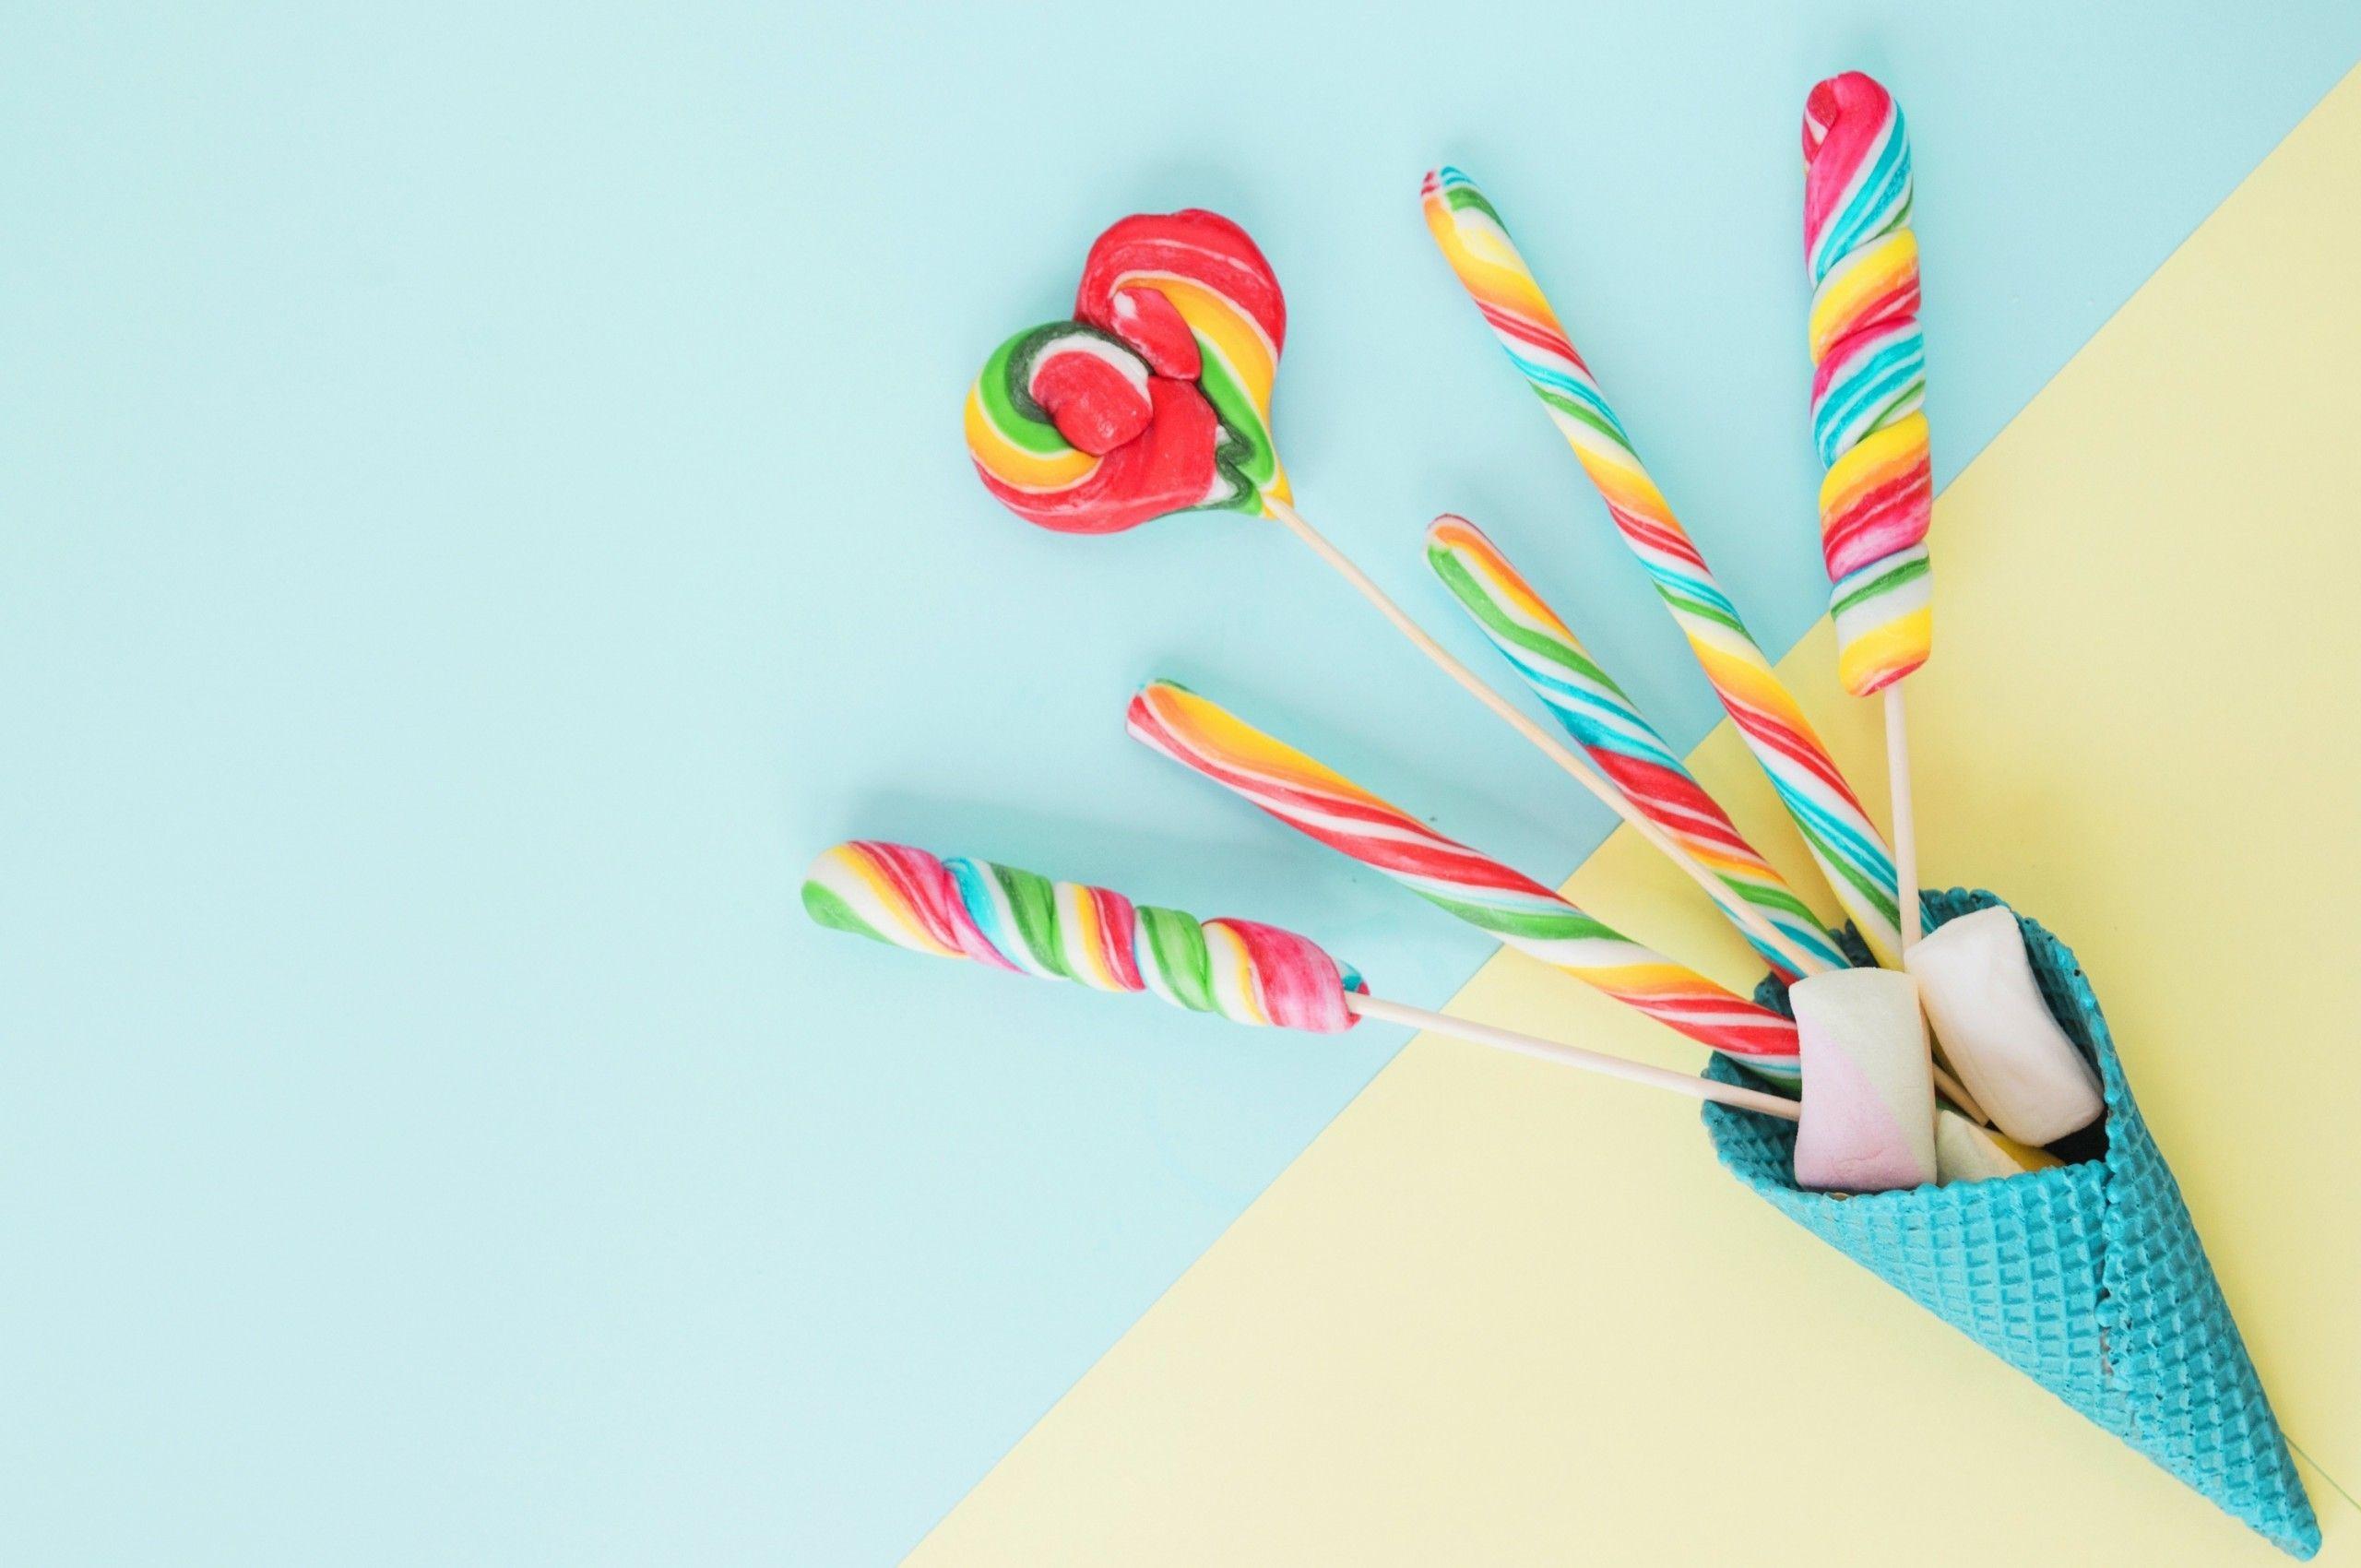 Download 2560x1700 Lollipops, Sweets, Candy Wallpaper